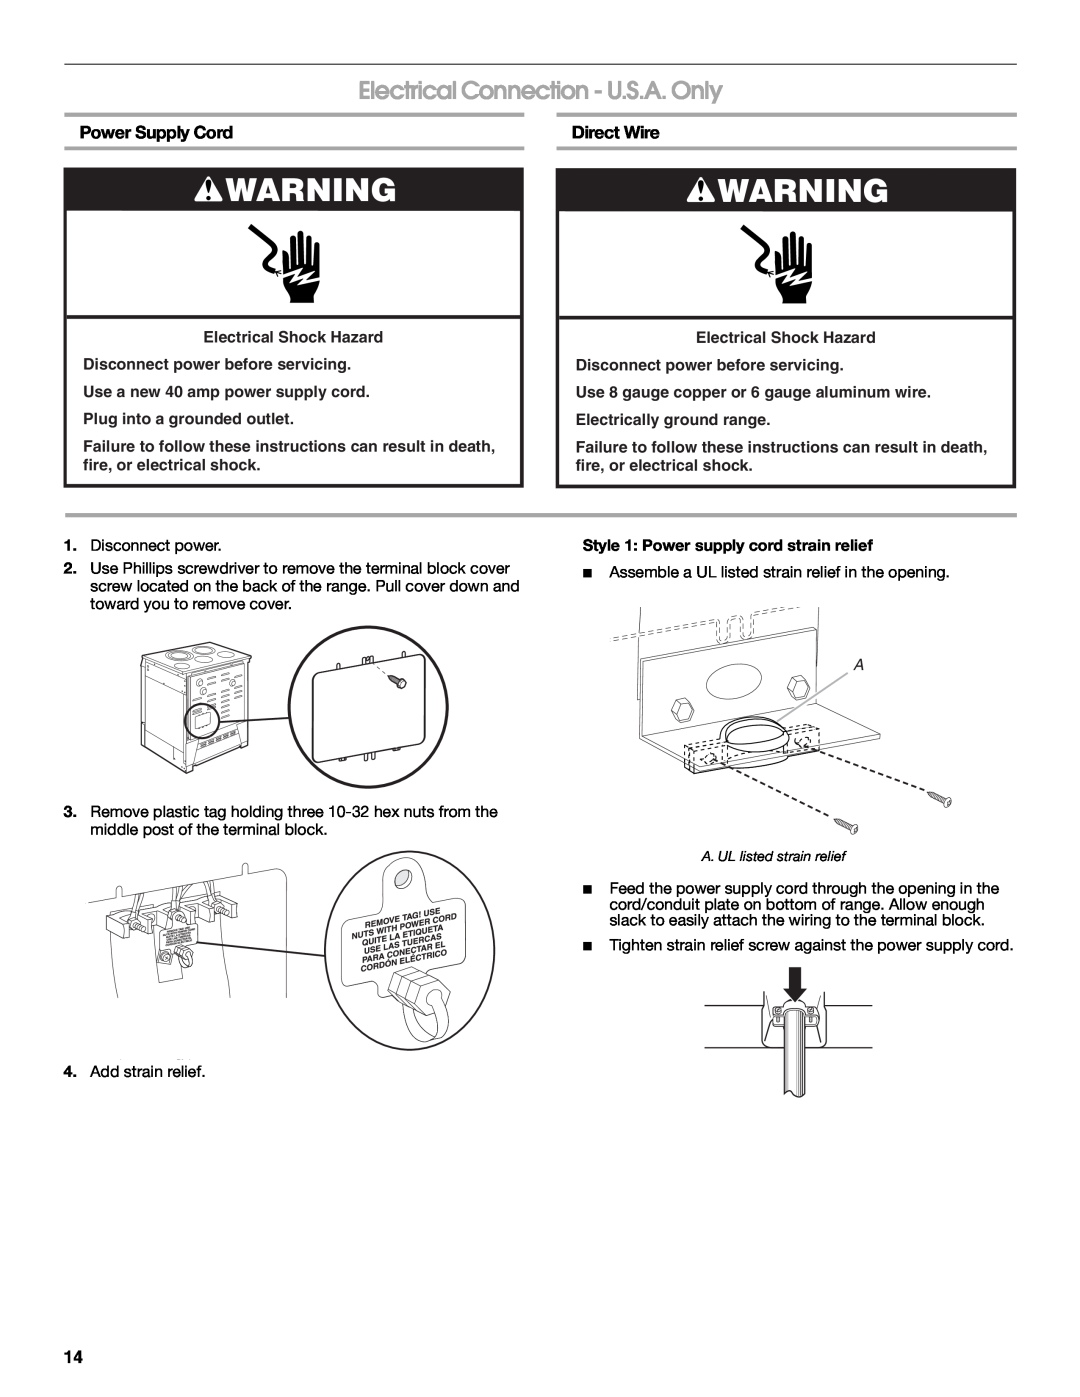 Jenn-Air W10253462A installation instructions Electrical Connection - U.S.A. Only, Power Supply Cord, Direct Wire 